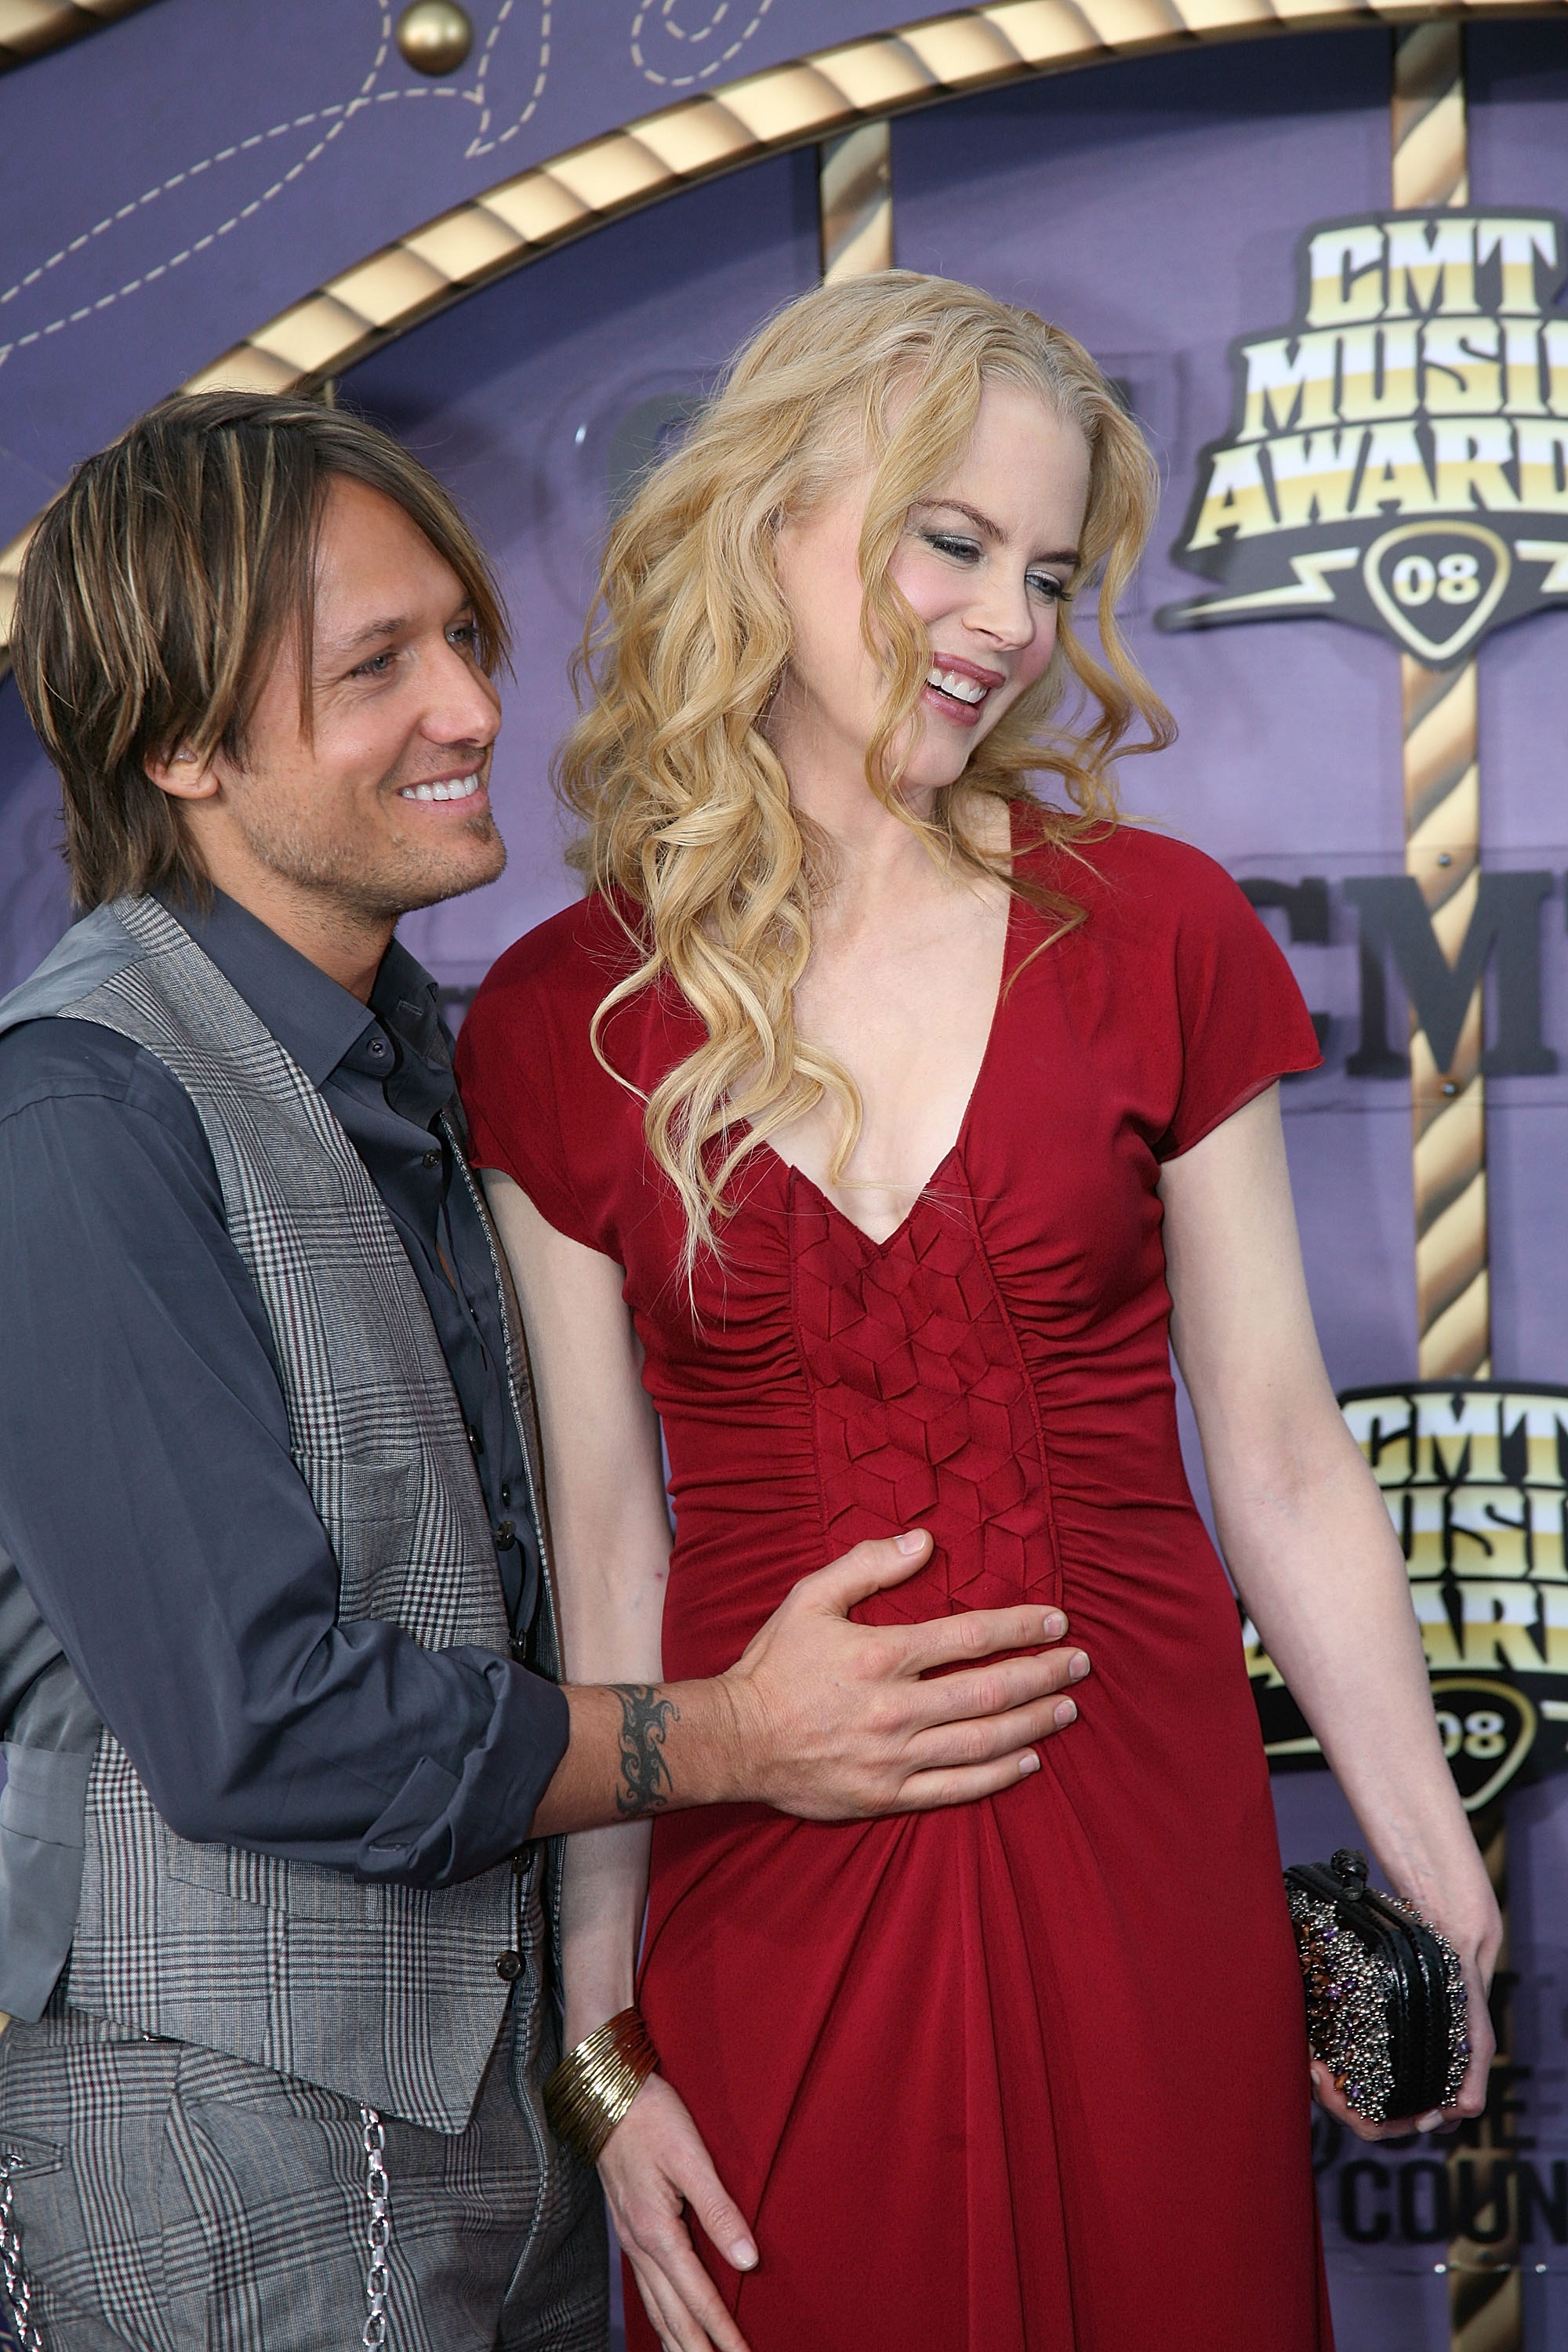 Musician Keith Urban and actress Nicole Kidman attend the 2008 CMT Music Awards at Curb Event Center at Belmont University on April 14, 2008 in Nashville, Tennessee. | Source: Getty Images